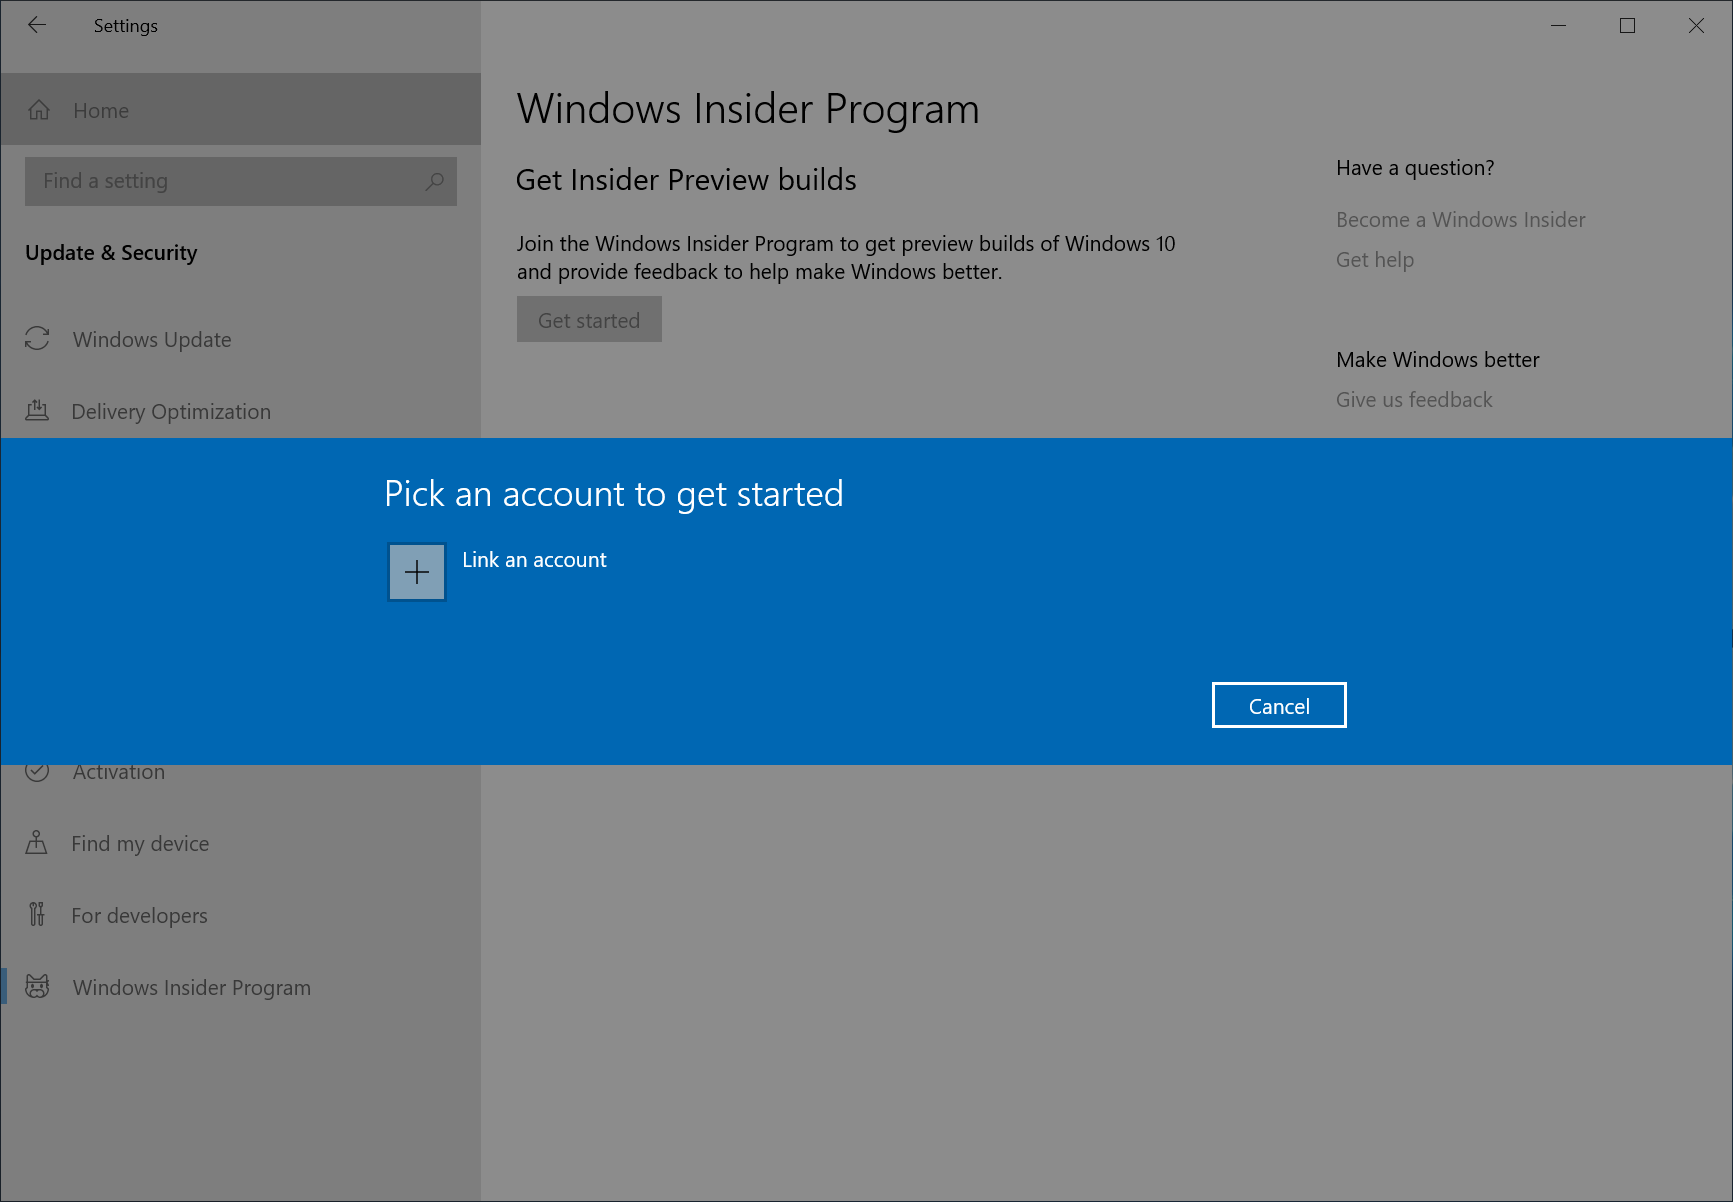 Link your Microsoft account or Azure Active Directory account. This is the email account you used to register for the Windows Insider Program. 